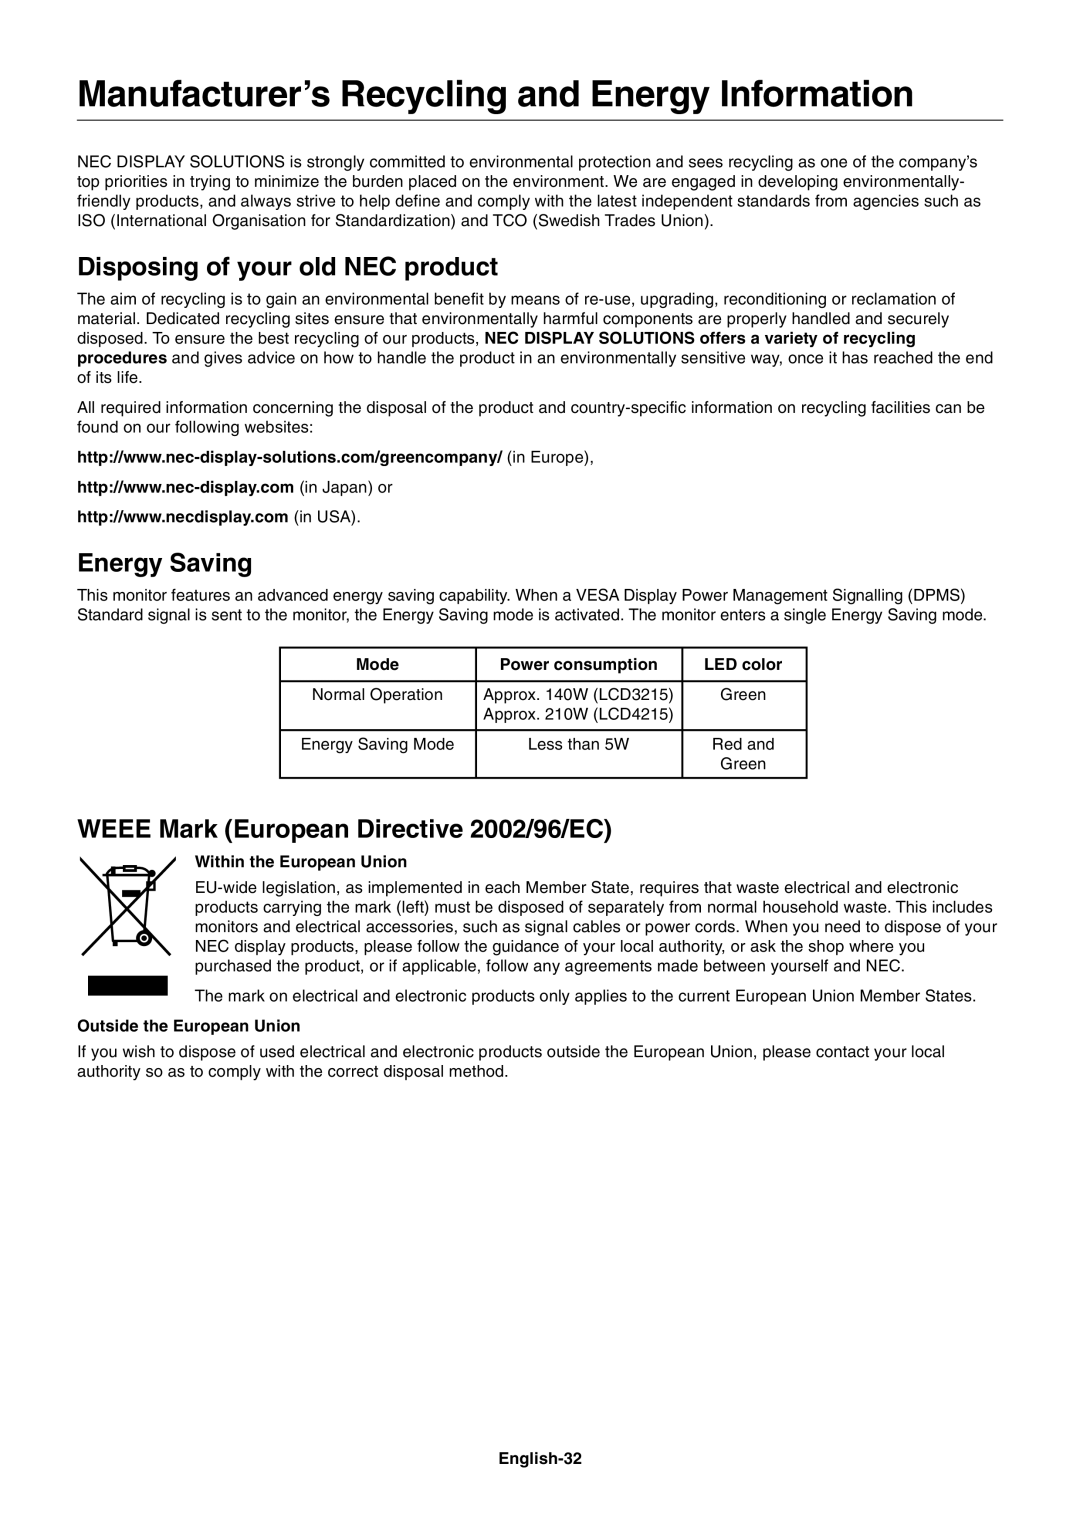 NEC LCD3215, LCD4215 Manufacturer’s Recycling and Energy Information, Disposing of your old NEC product, Energy Saving 